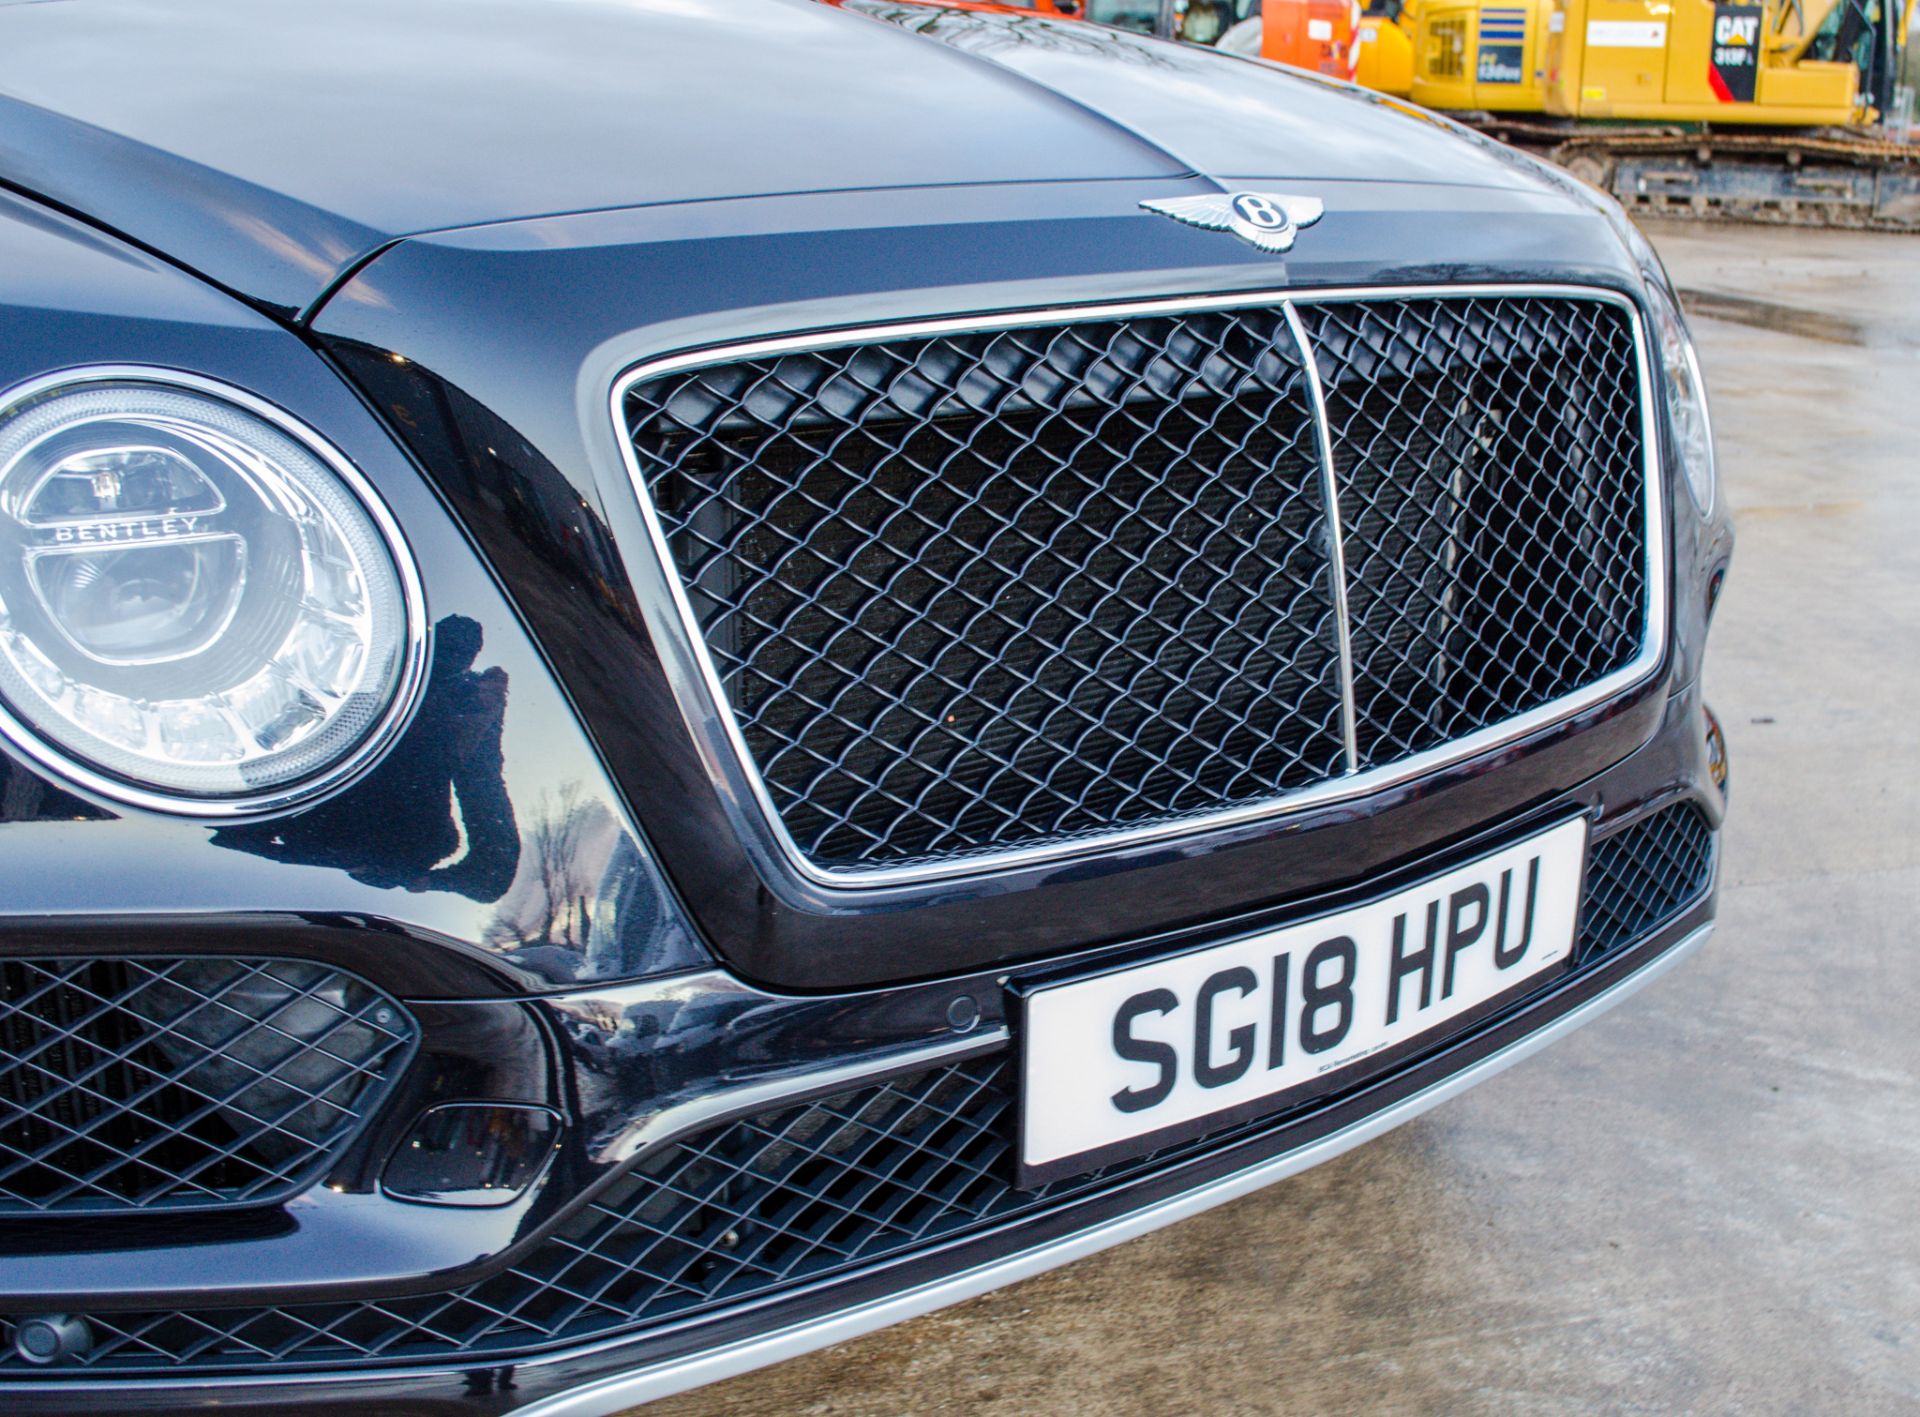 Bentley Bentayga 4.0 V8 diesel 4wd 7 seat SUV Reg No: SG 18 HPU Recorded Mileage: 37,650 Date of - Image 8 of 41